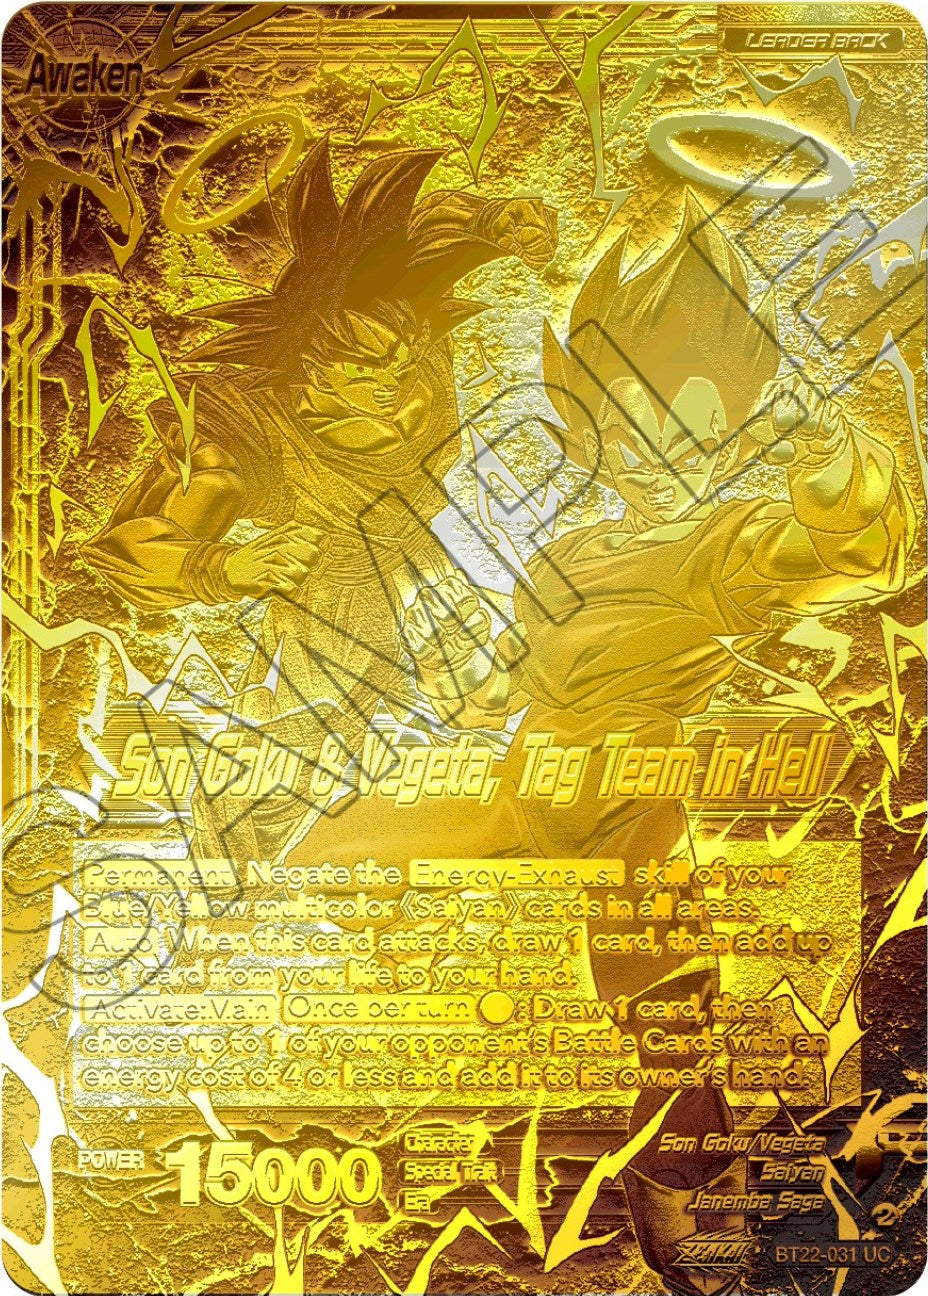 Son Goku // Son Goku & Vegeta, Tag Team in Hell (2023 Championship Finals) (Gold Metal Foil) (BT22-031) [Tournament Promotion Cards] | The Time Vault CA